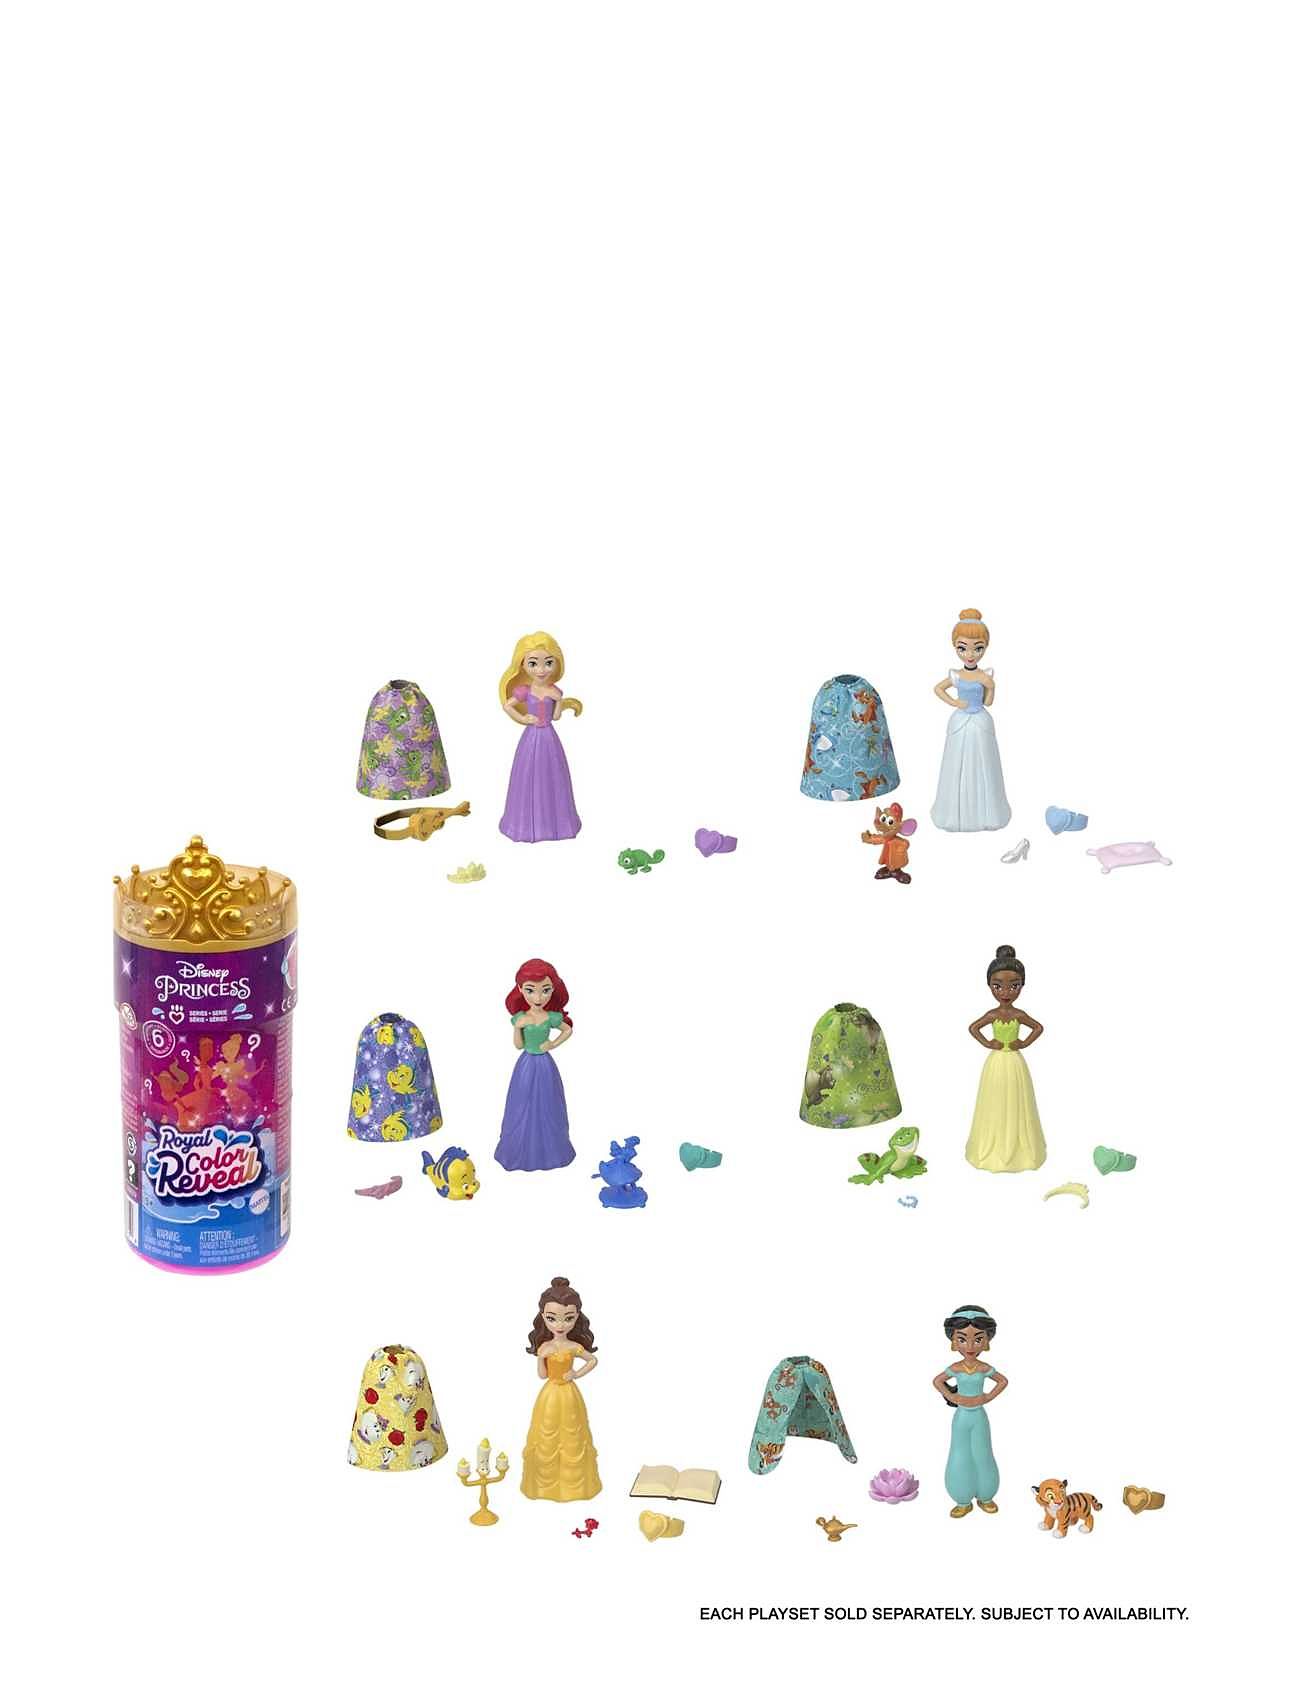 Disney Princess Royal Color Reveal Assortment Toys Playsets & Action Figures Movies & Fairy Tale Characters Multi/patterned Disney Princess